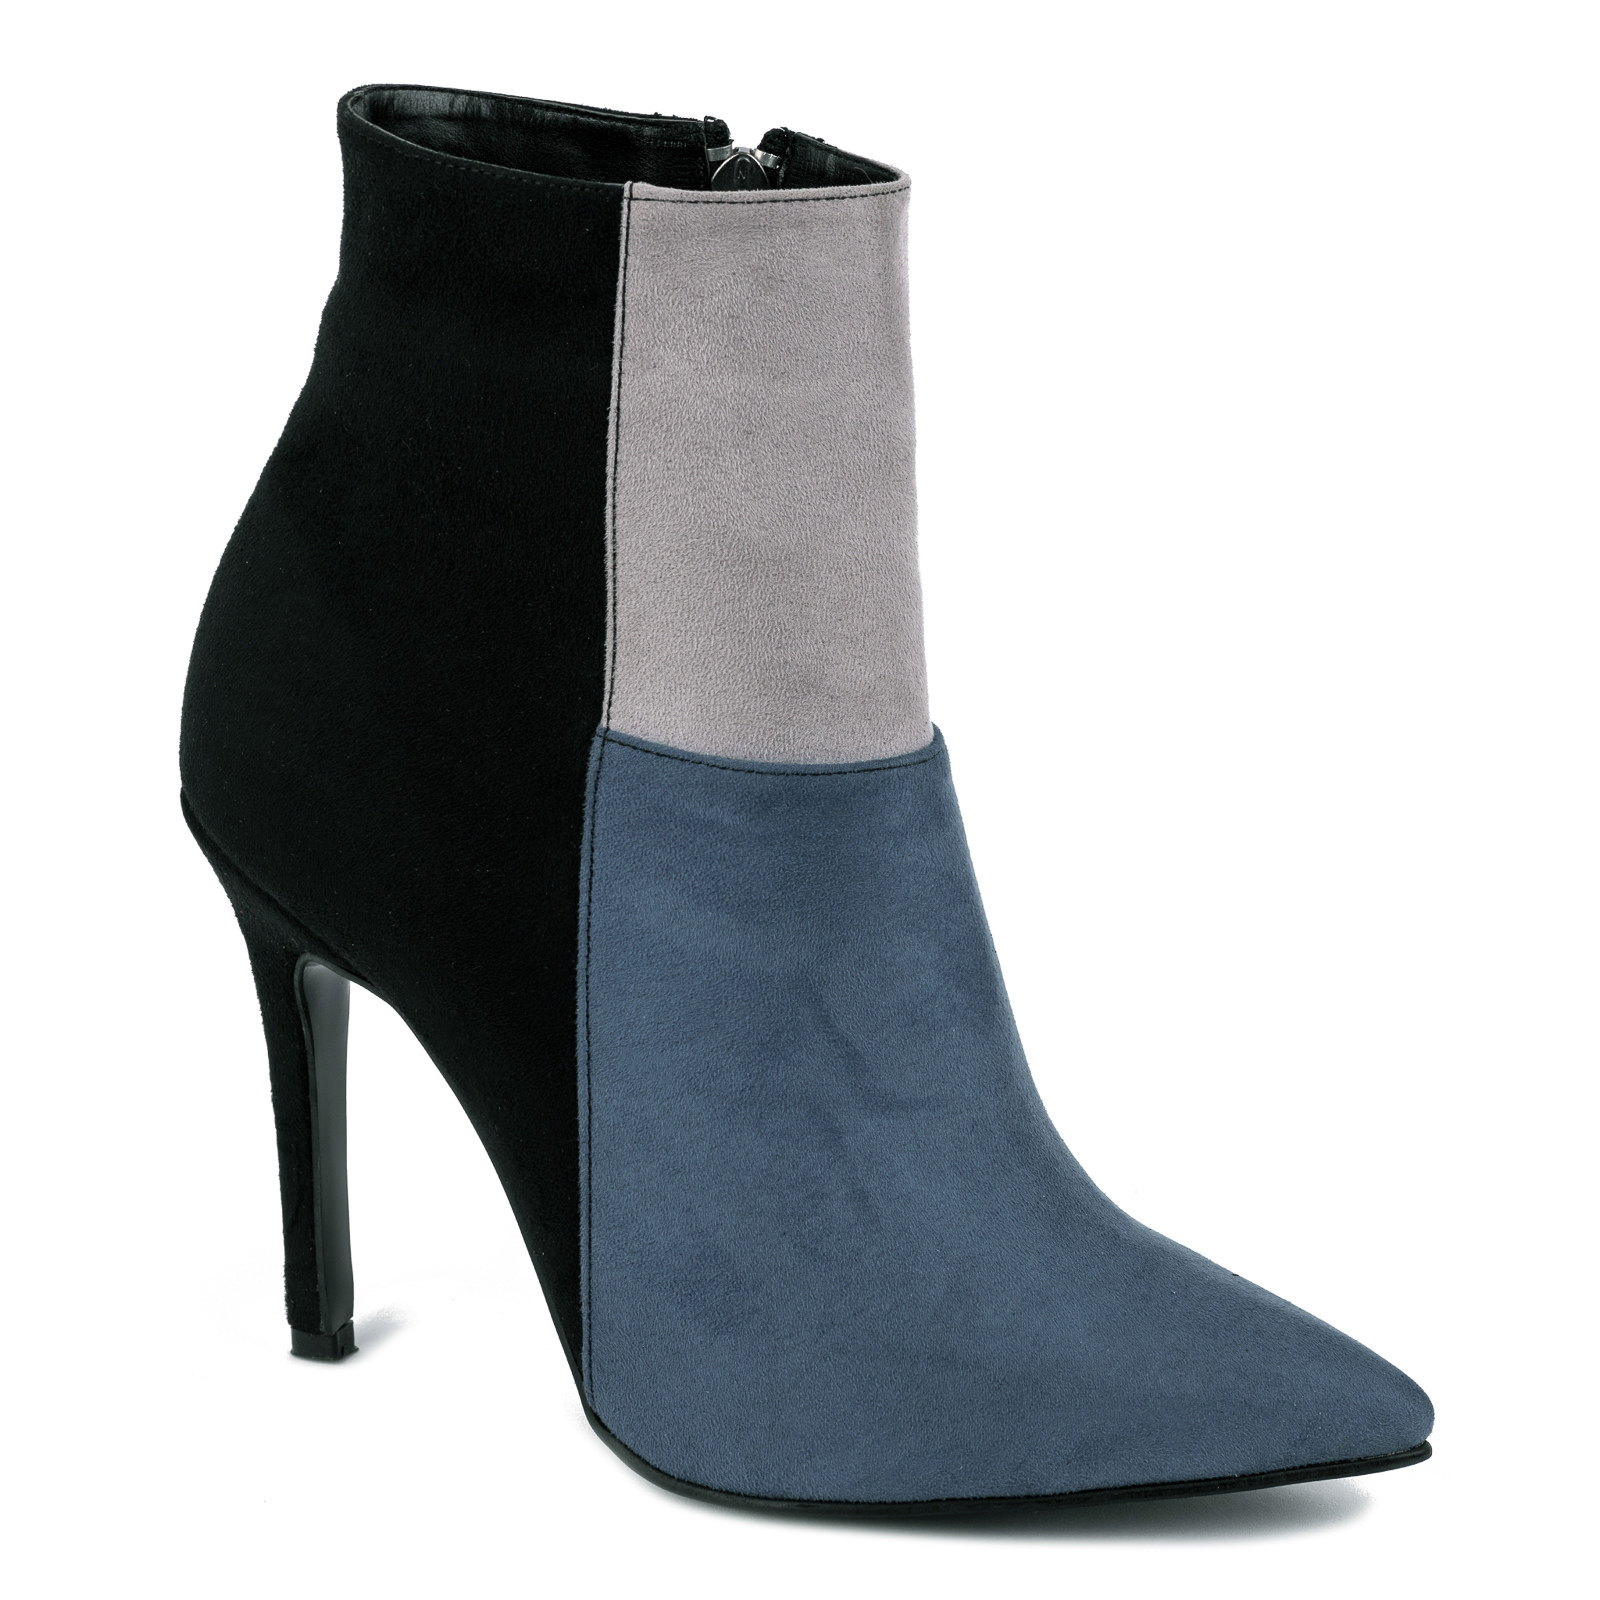 VELOUR POINTED ANKLE BOOTS WITH THIN HEEL - BLACK/GRAY/BLUE